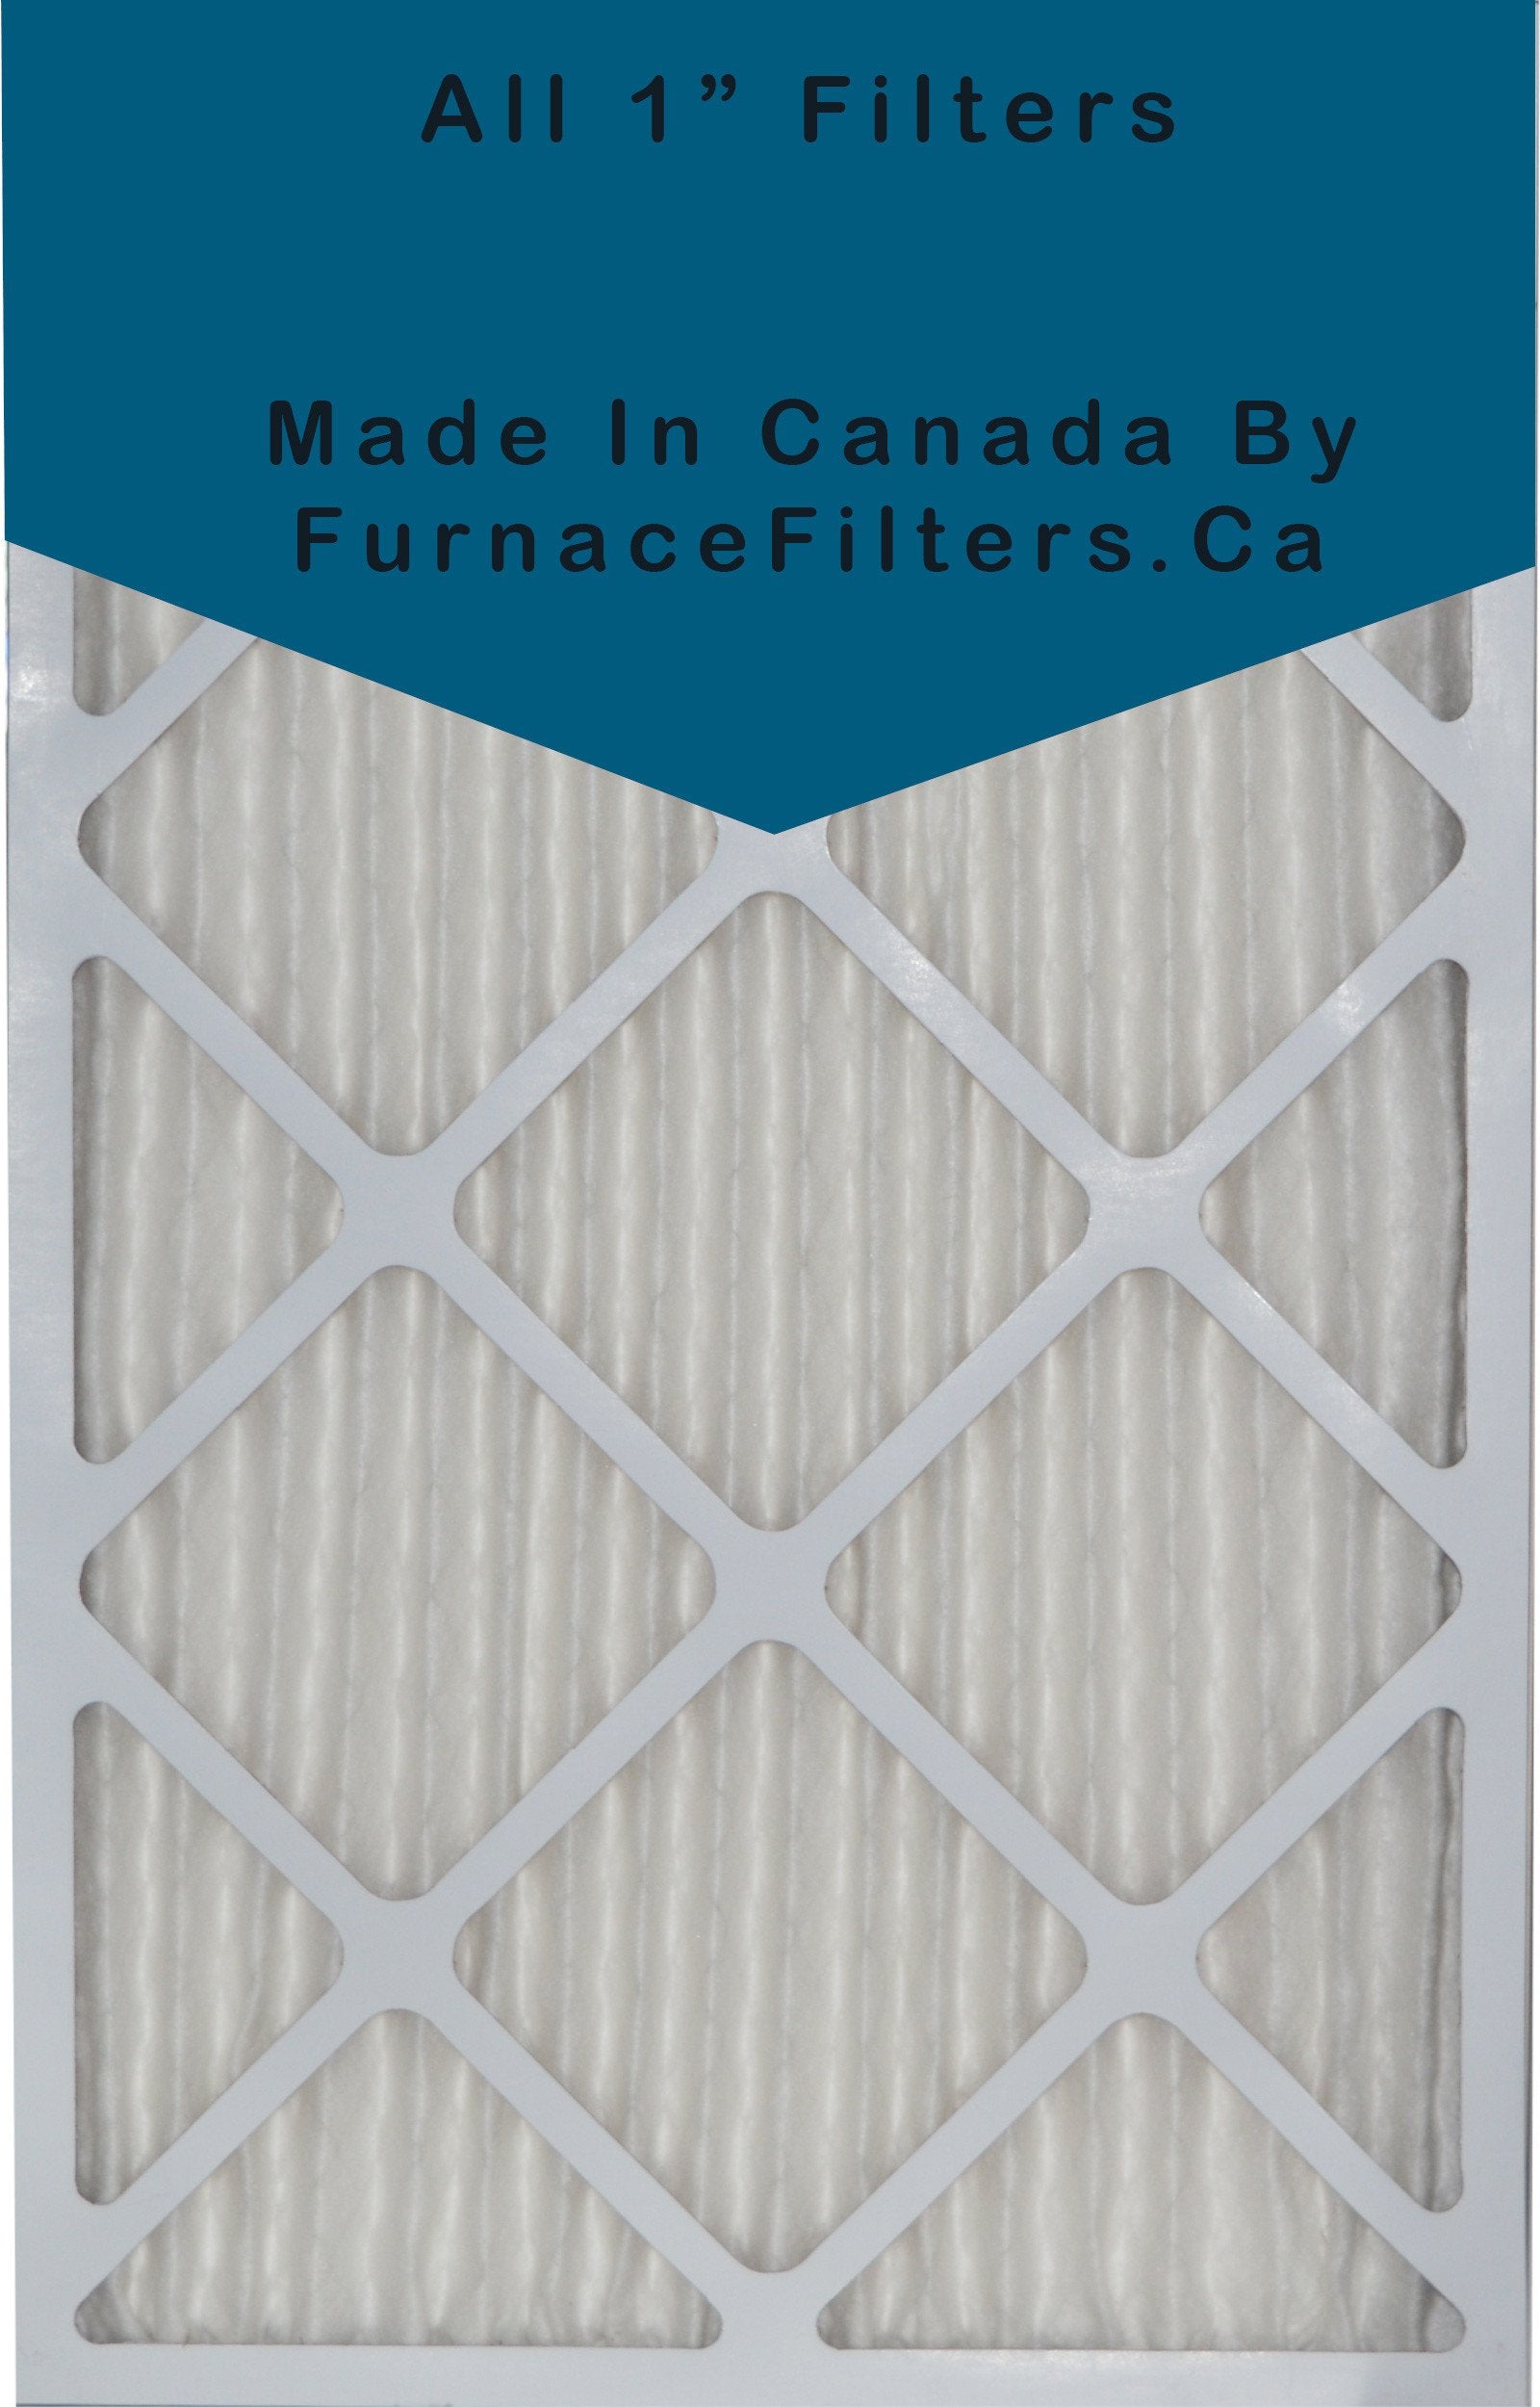 20x24x1 Furnace Filter MERV 8 Pleated Filters. Case of 12